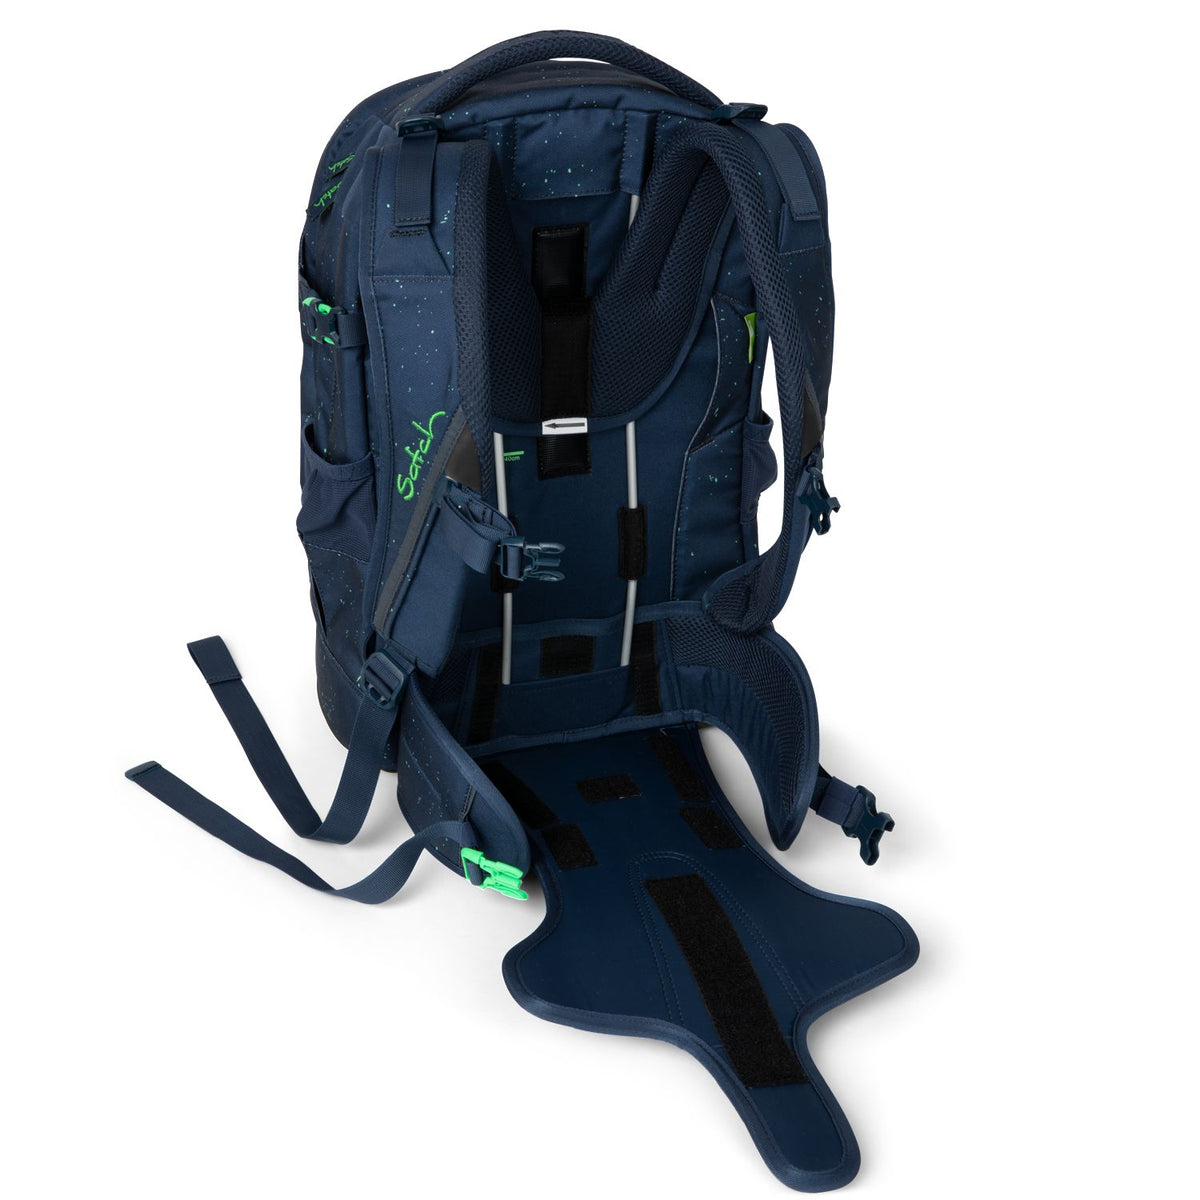 Satch school backpack for teenagers